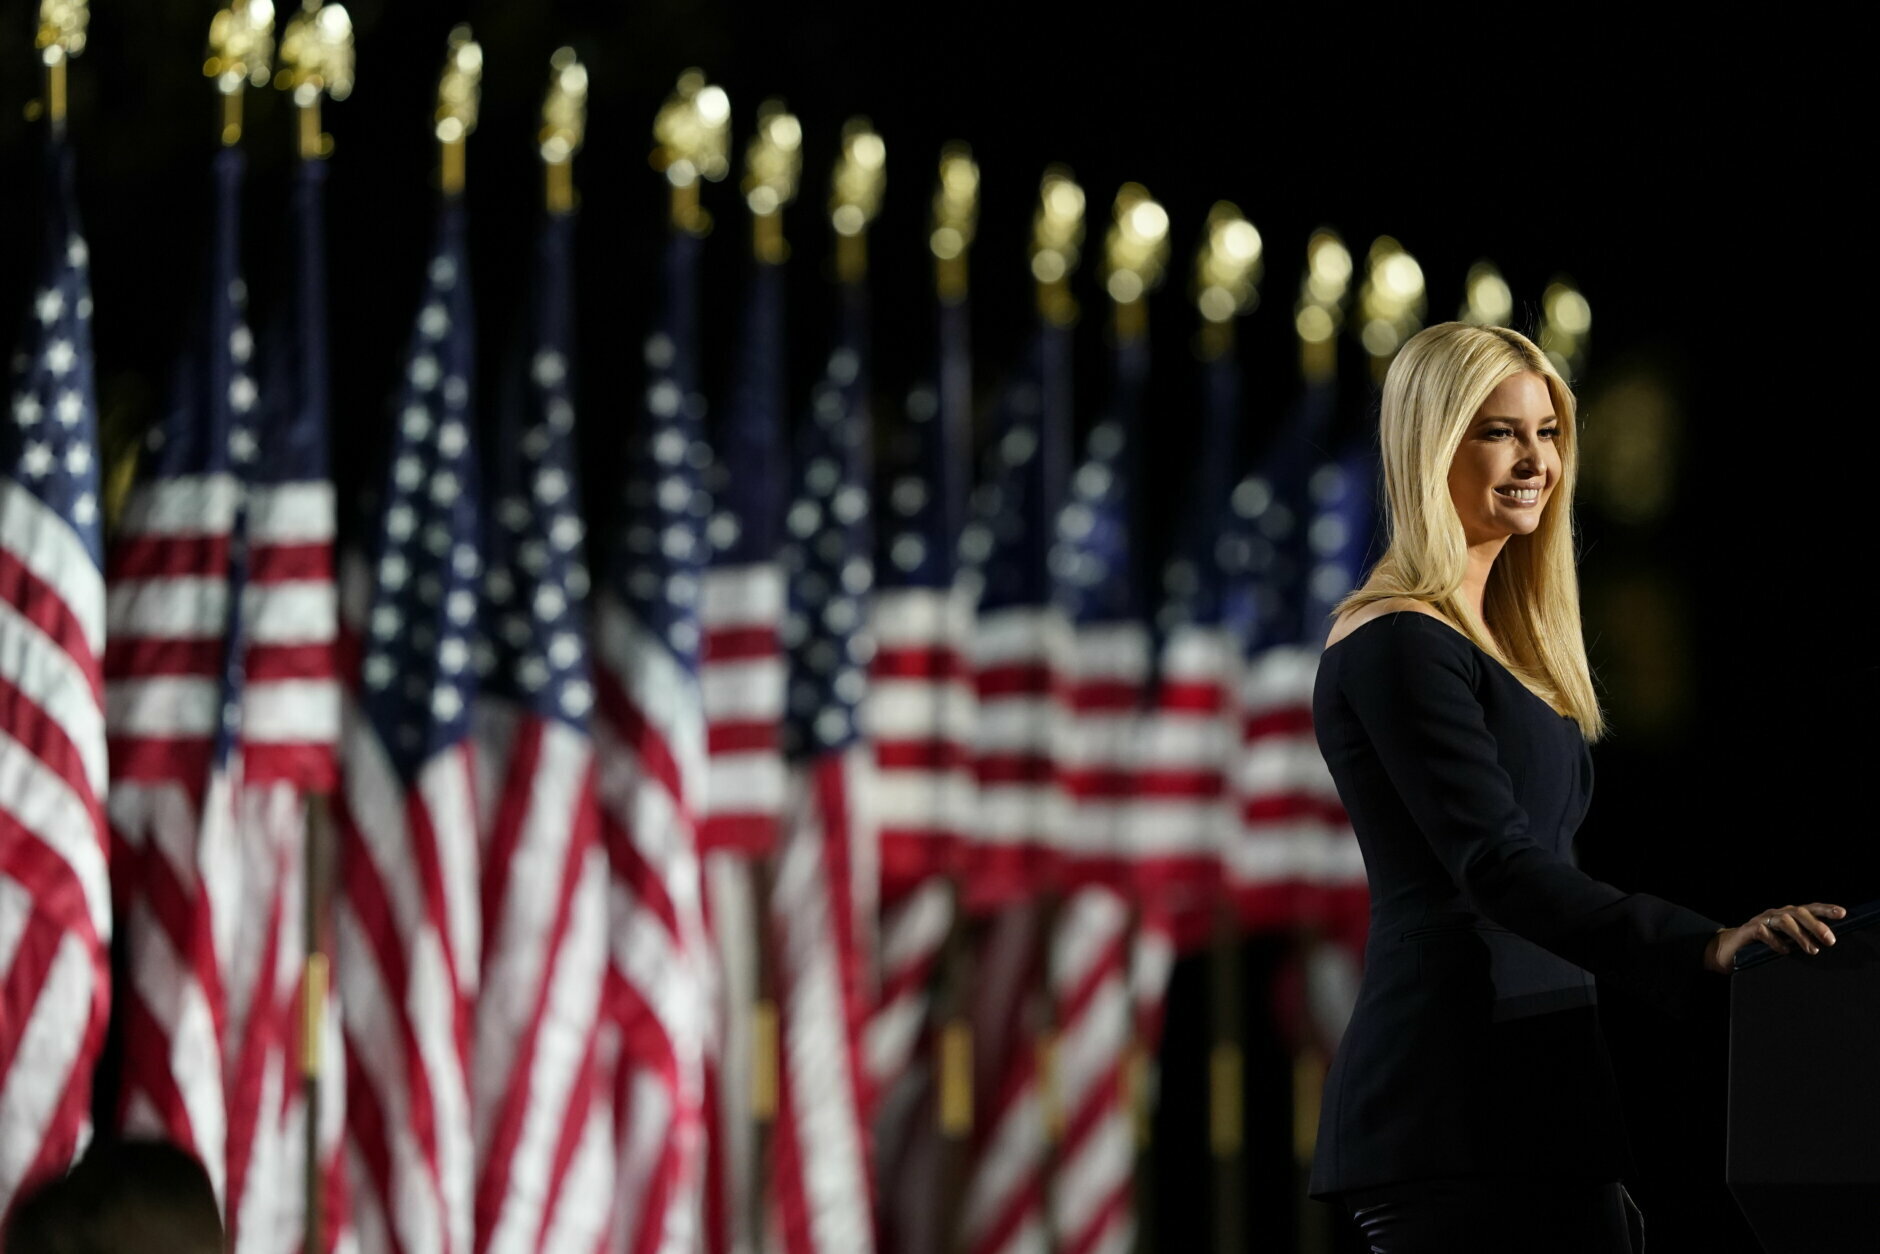 Ivanka Trump speaks from the South Lawn of the White House on the fourth day of the Republican National Convention, Thursday, Aug. 27, 2020, in Washington. (AP Photo/Alex Brandon)